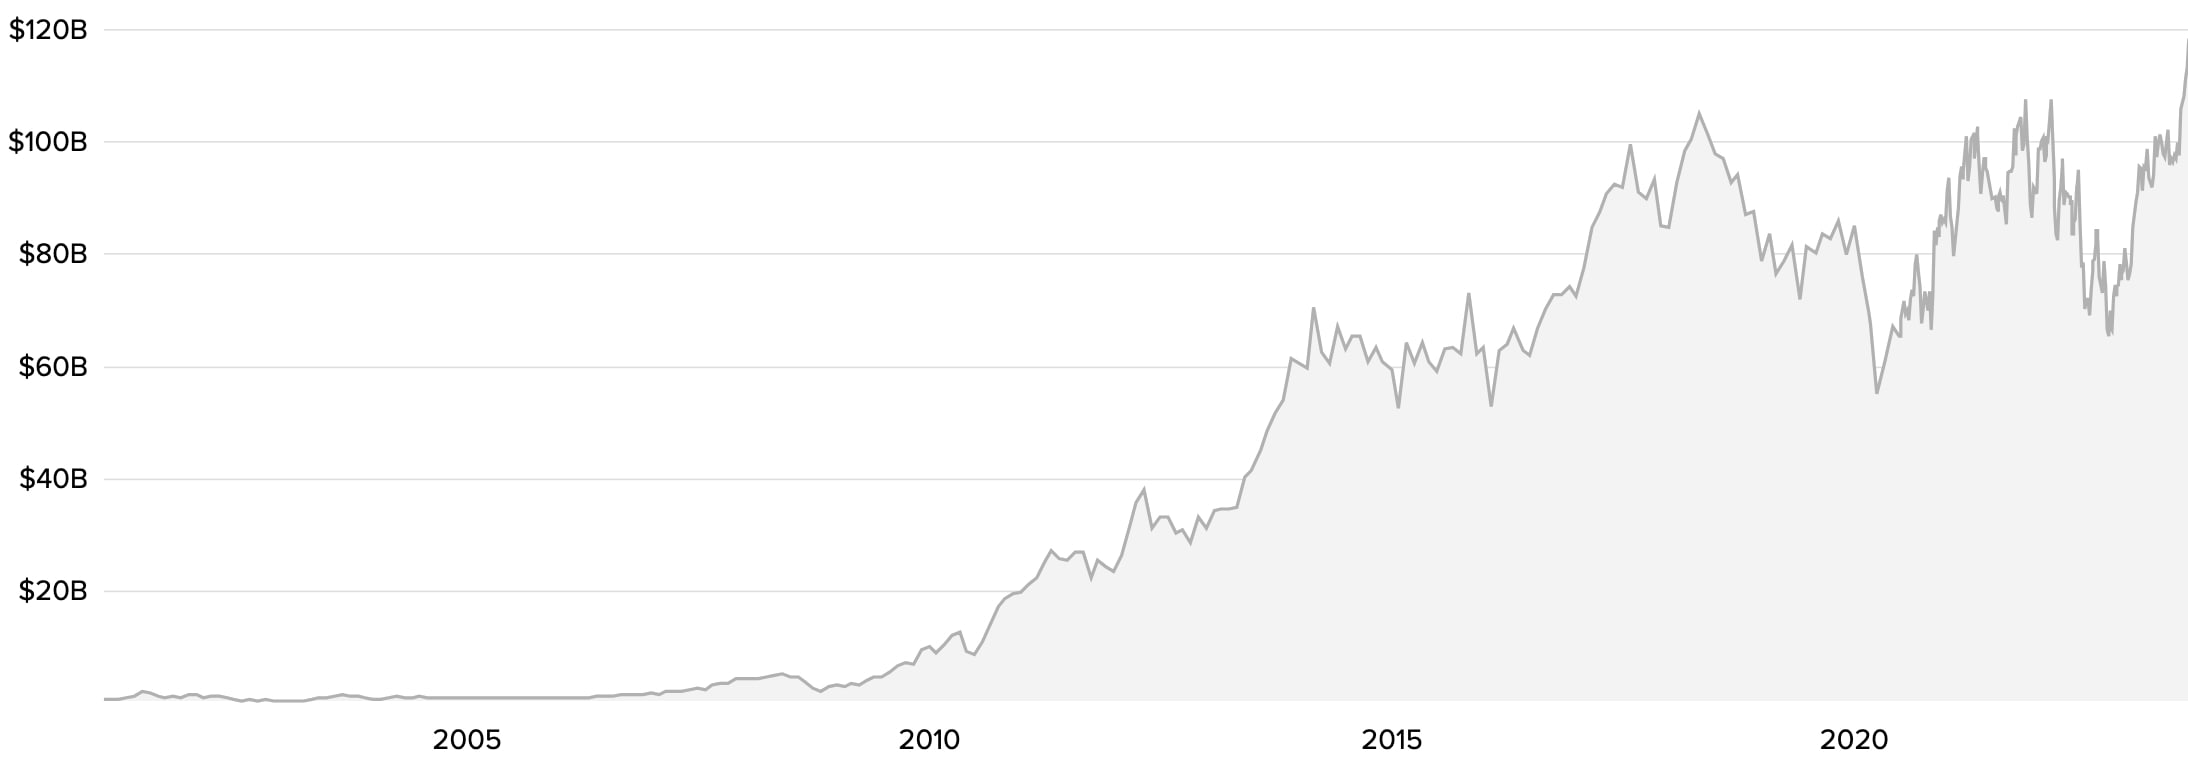 The market capitalization history of Booking.com